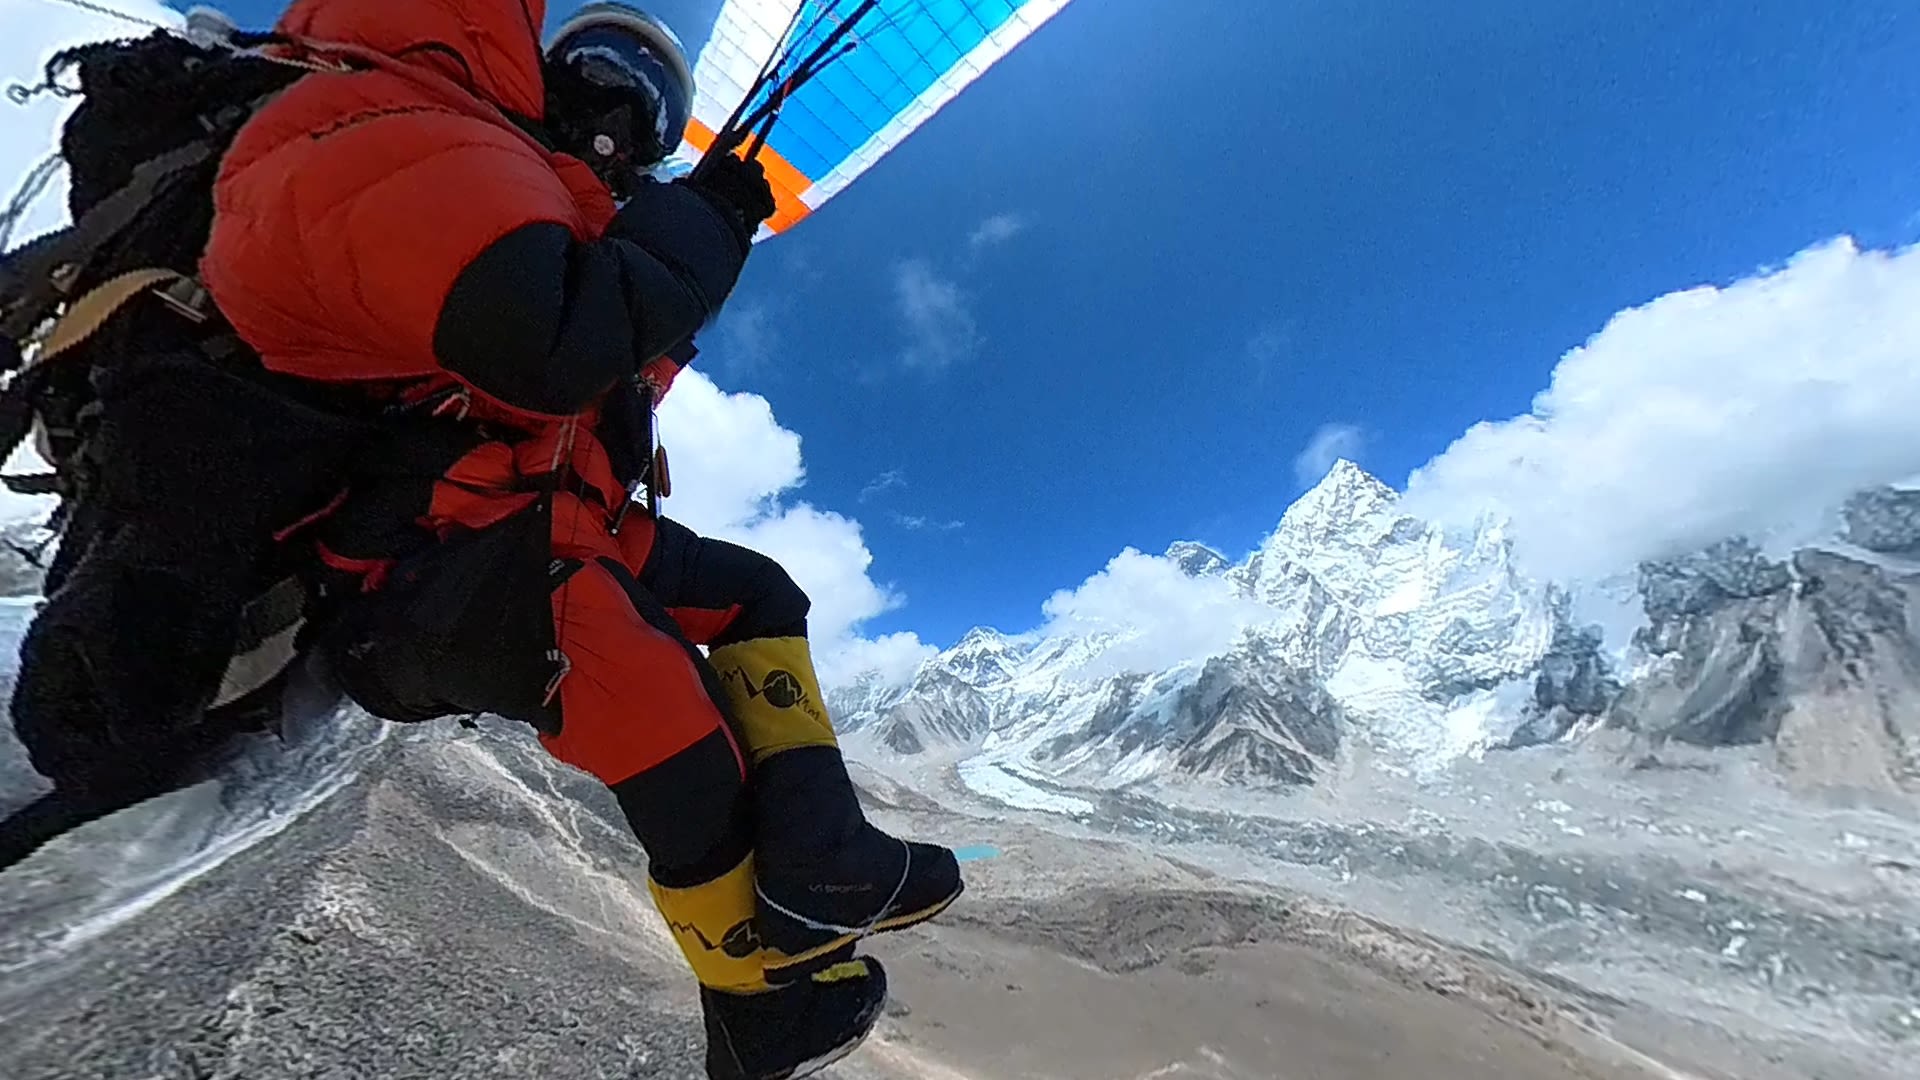 <strong>Crash landing into you:</strong> Landing at Everest Base Camp was too risky, so Carter opted to land in a village about 7 km (4.3 miles) away and walk back.